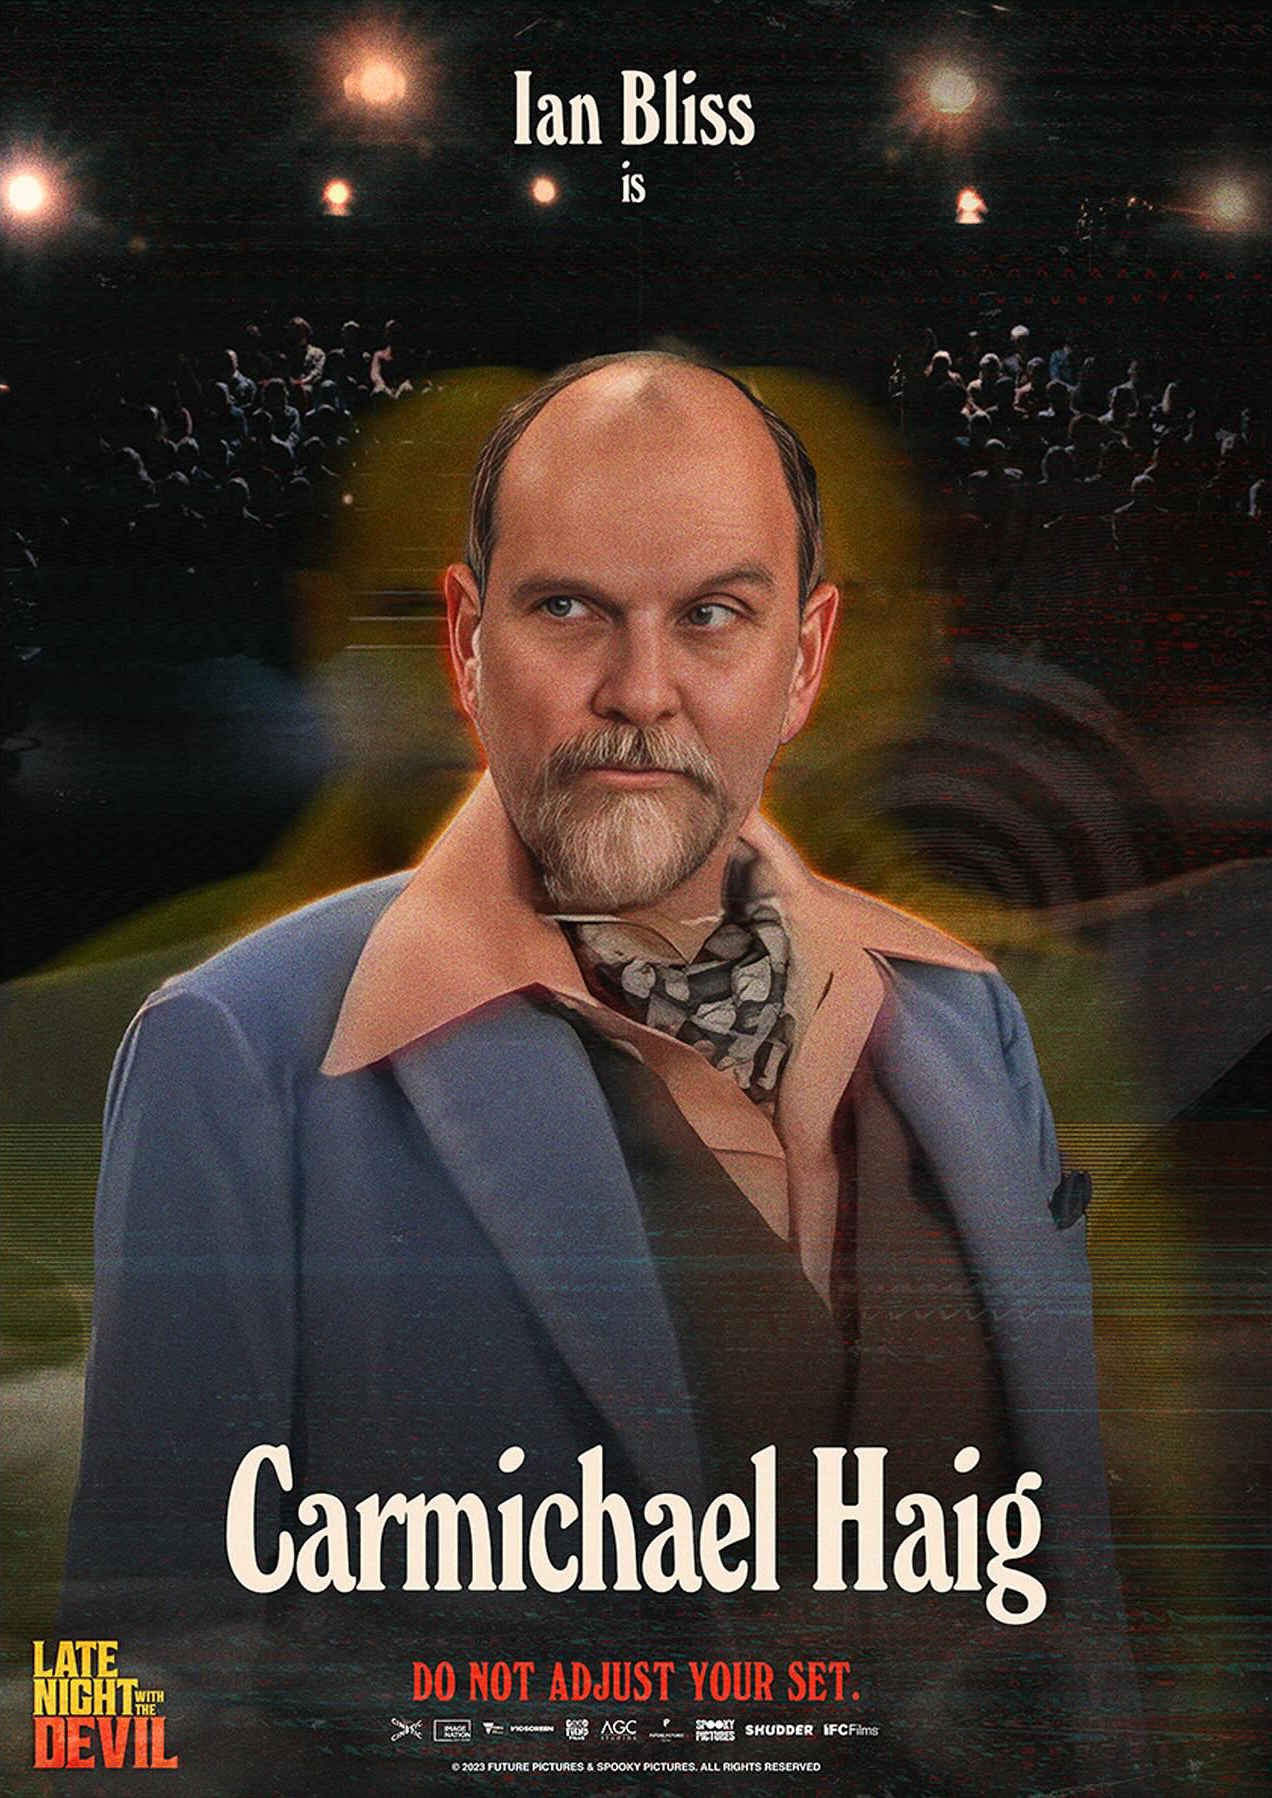 Late-Night-with-the-Devil-character-poster-Carmichael-Haig-by-@alt_fiction-and-altfiction.etsy.com.jpg